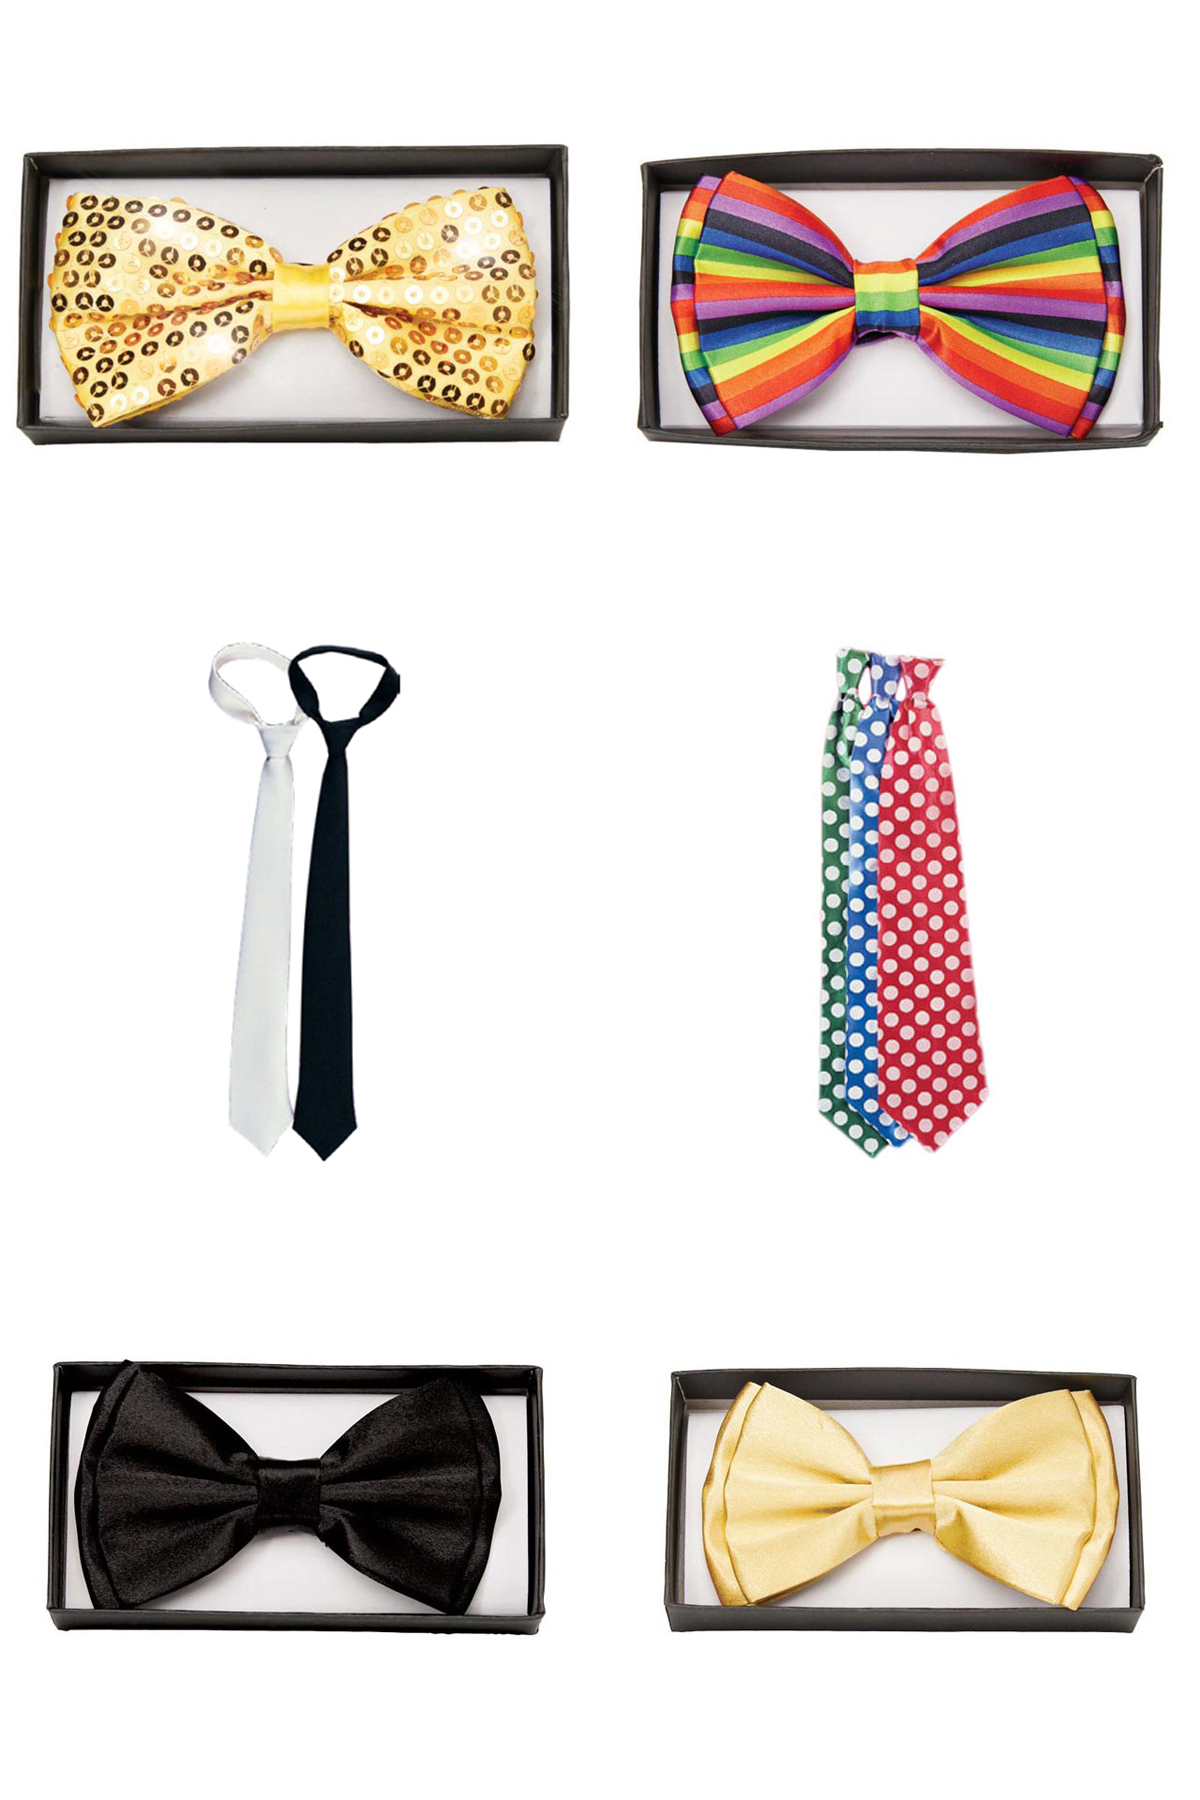 costume-accessories-ties-and-bowties-main-link